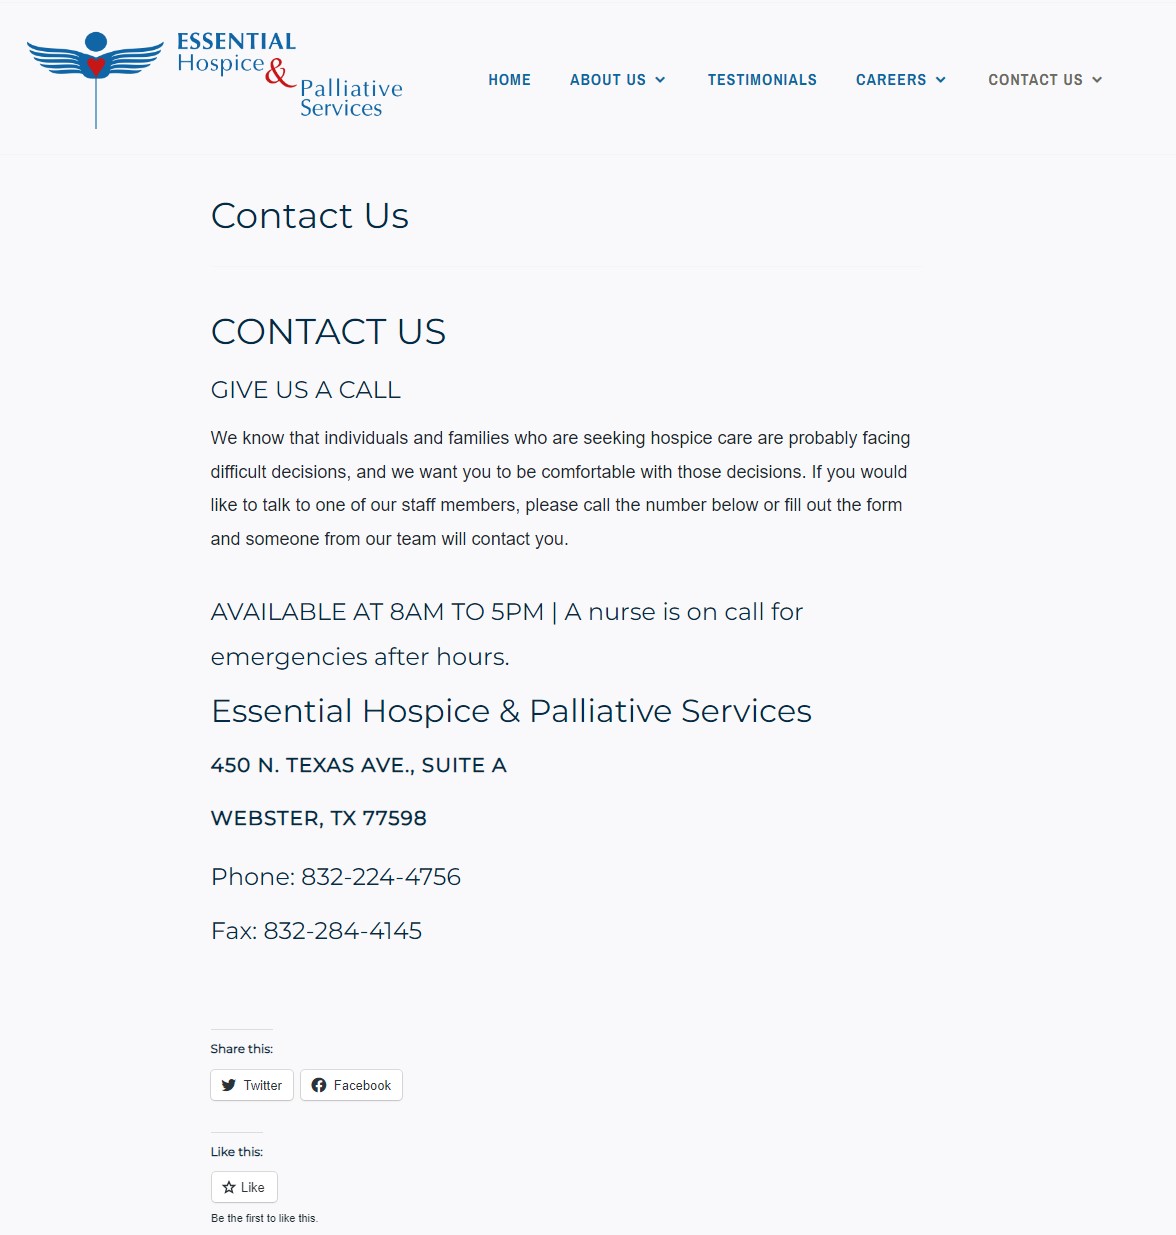 Essential Hospice websites' old contact page